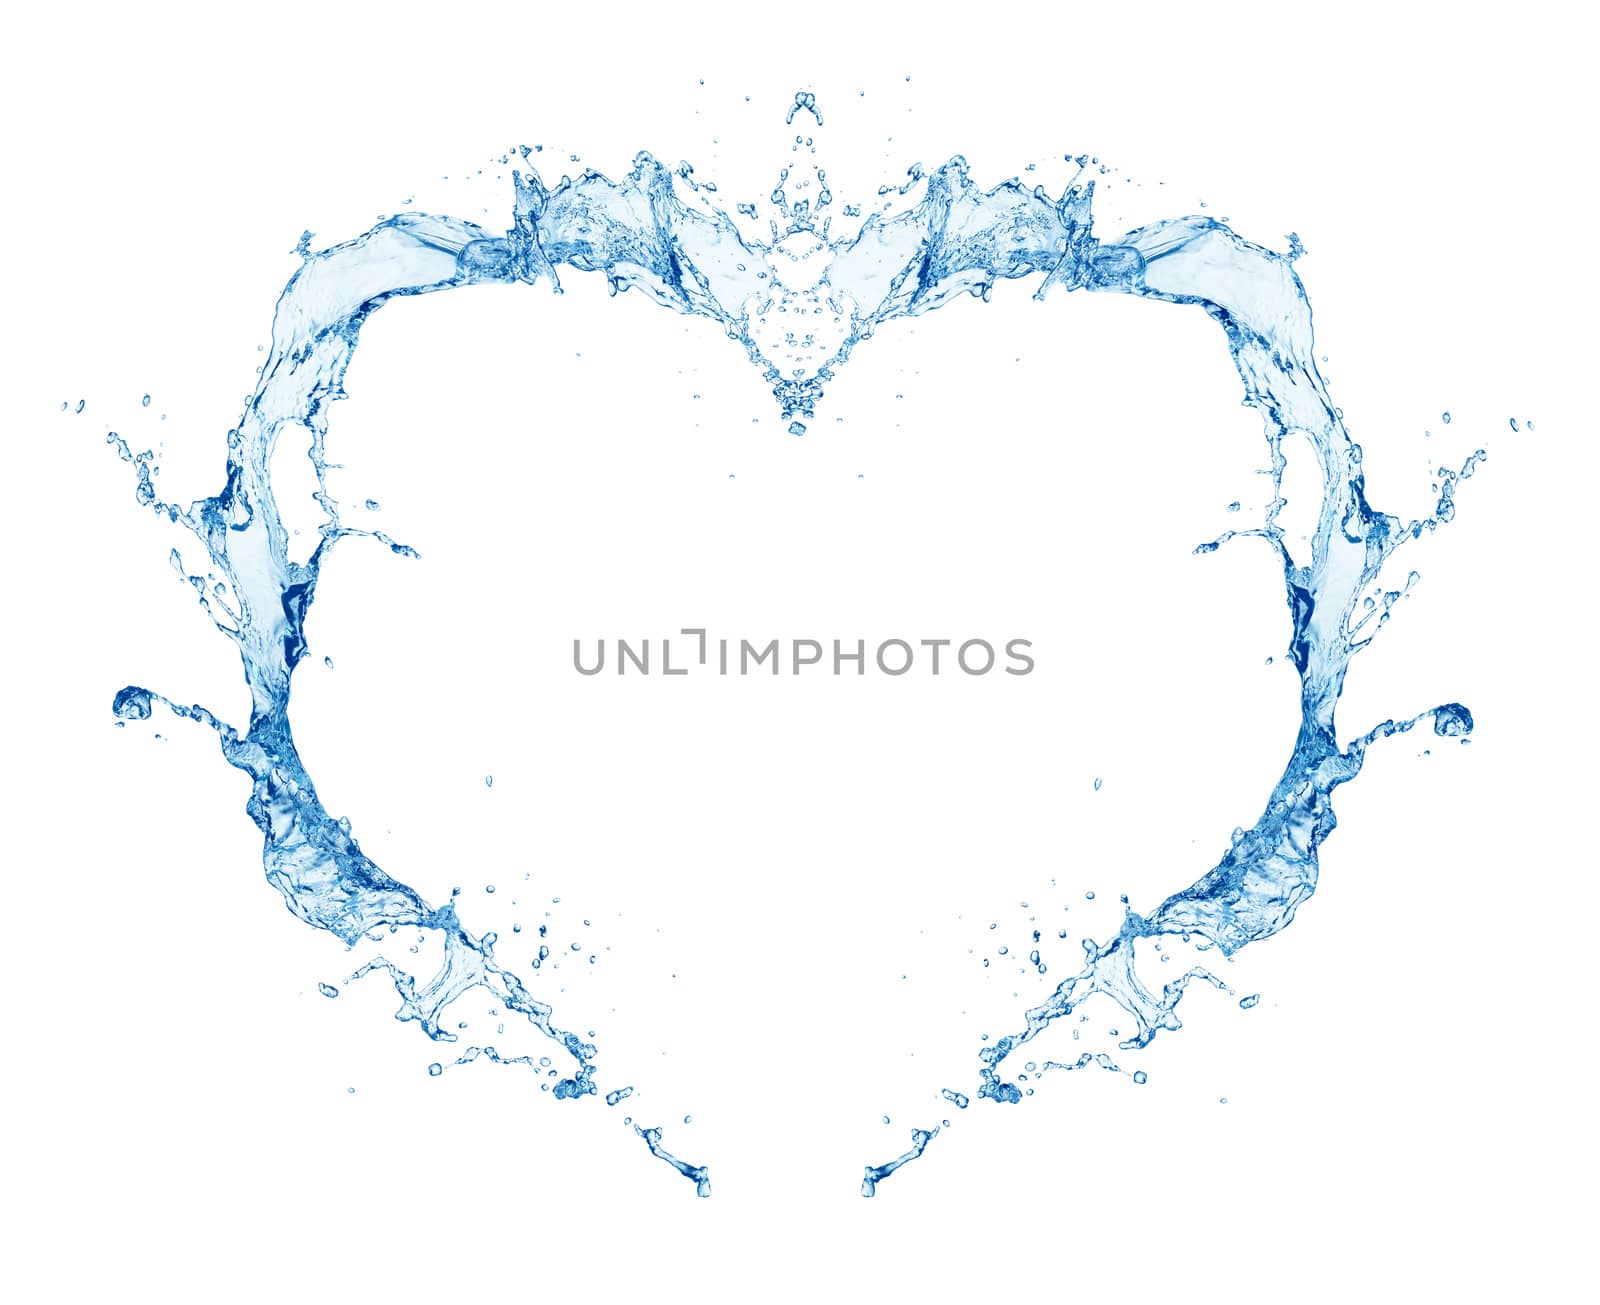 Water heart isolated on white background